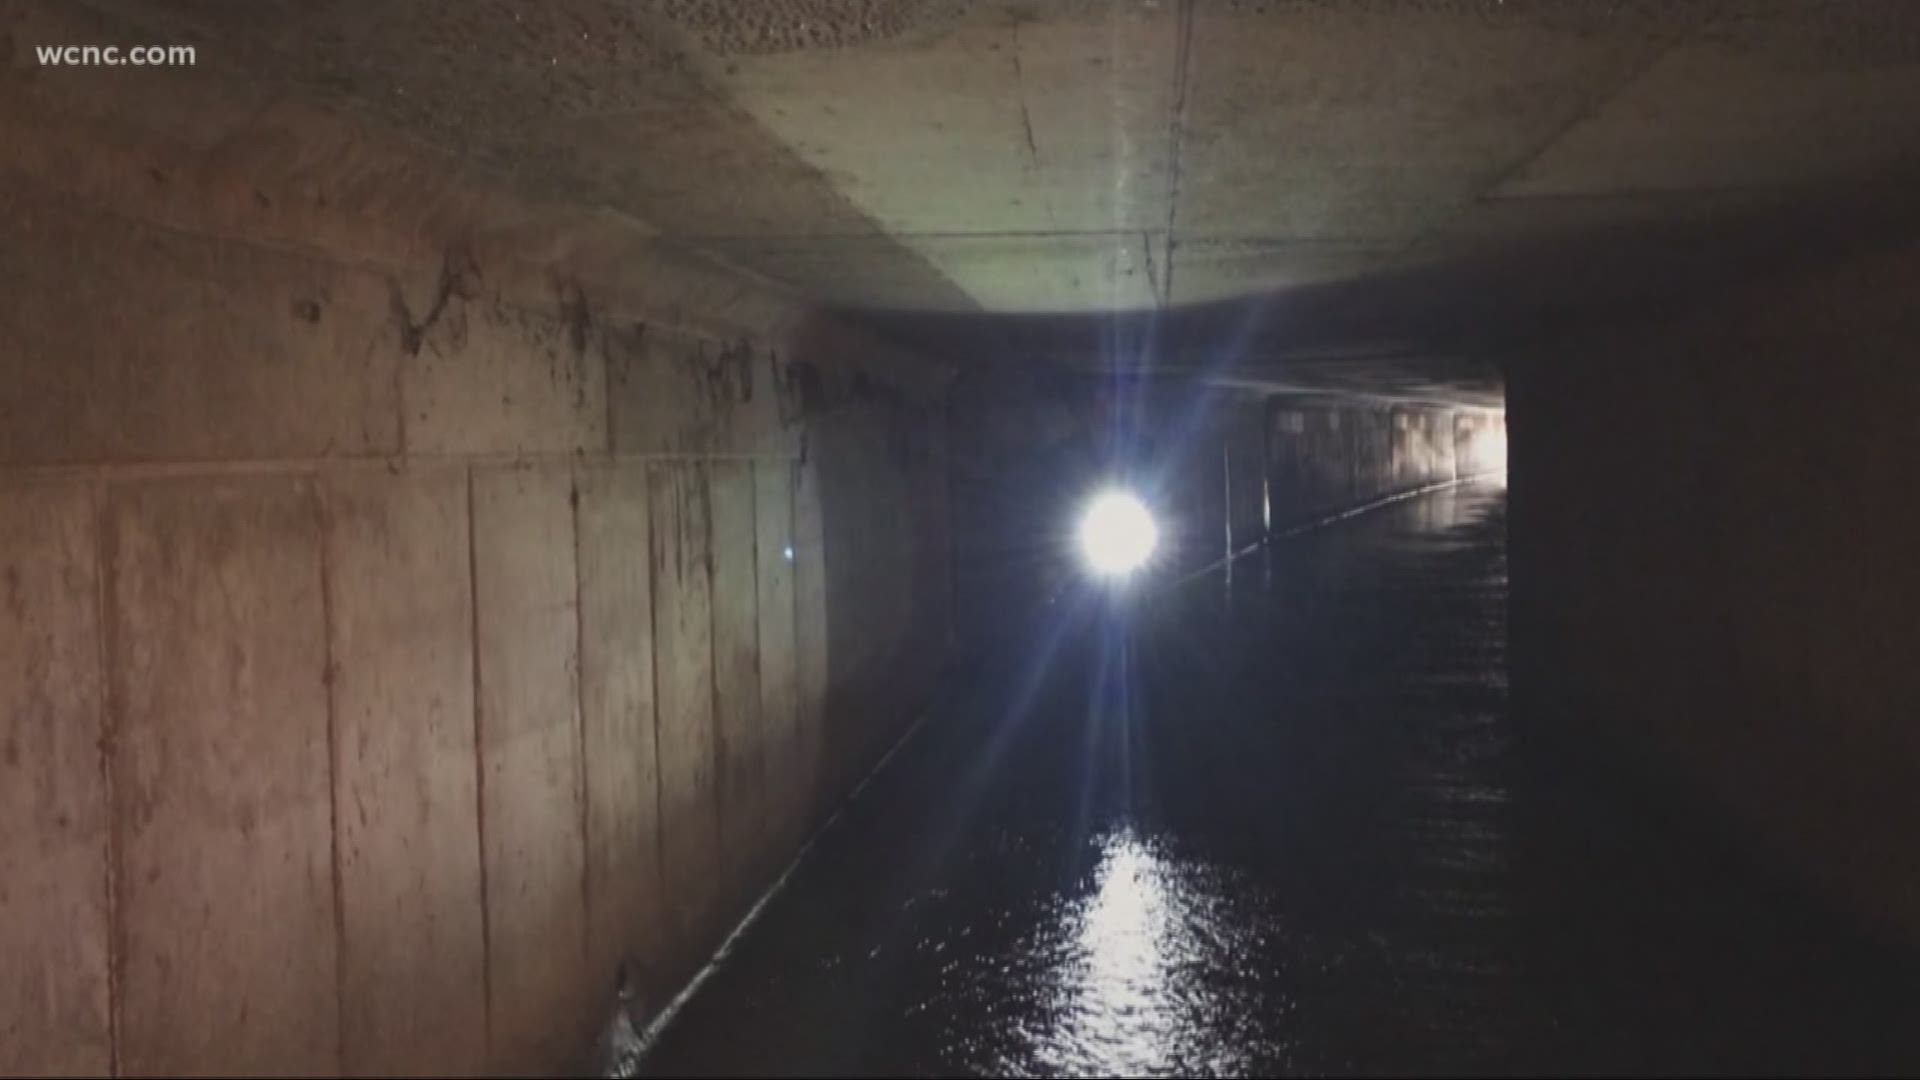 A massive network of underground storm water tunnels are meant to prevent flooding by funneling rainwater, but someone with bad intentions could create another kind of disaster.